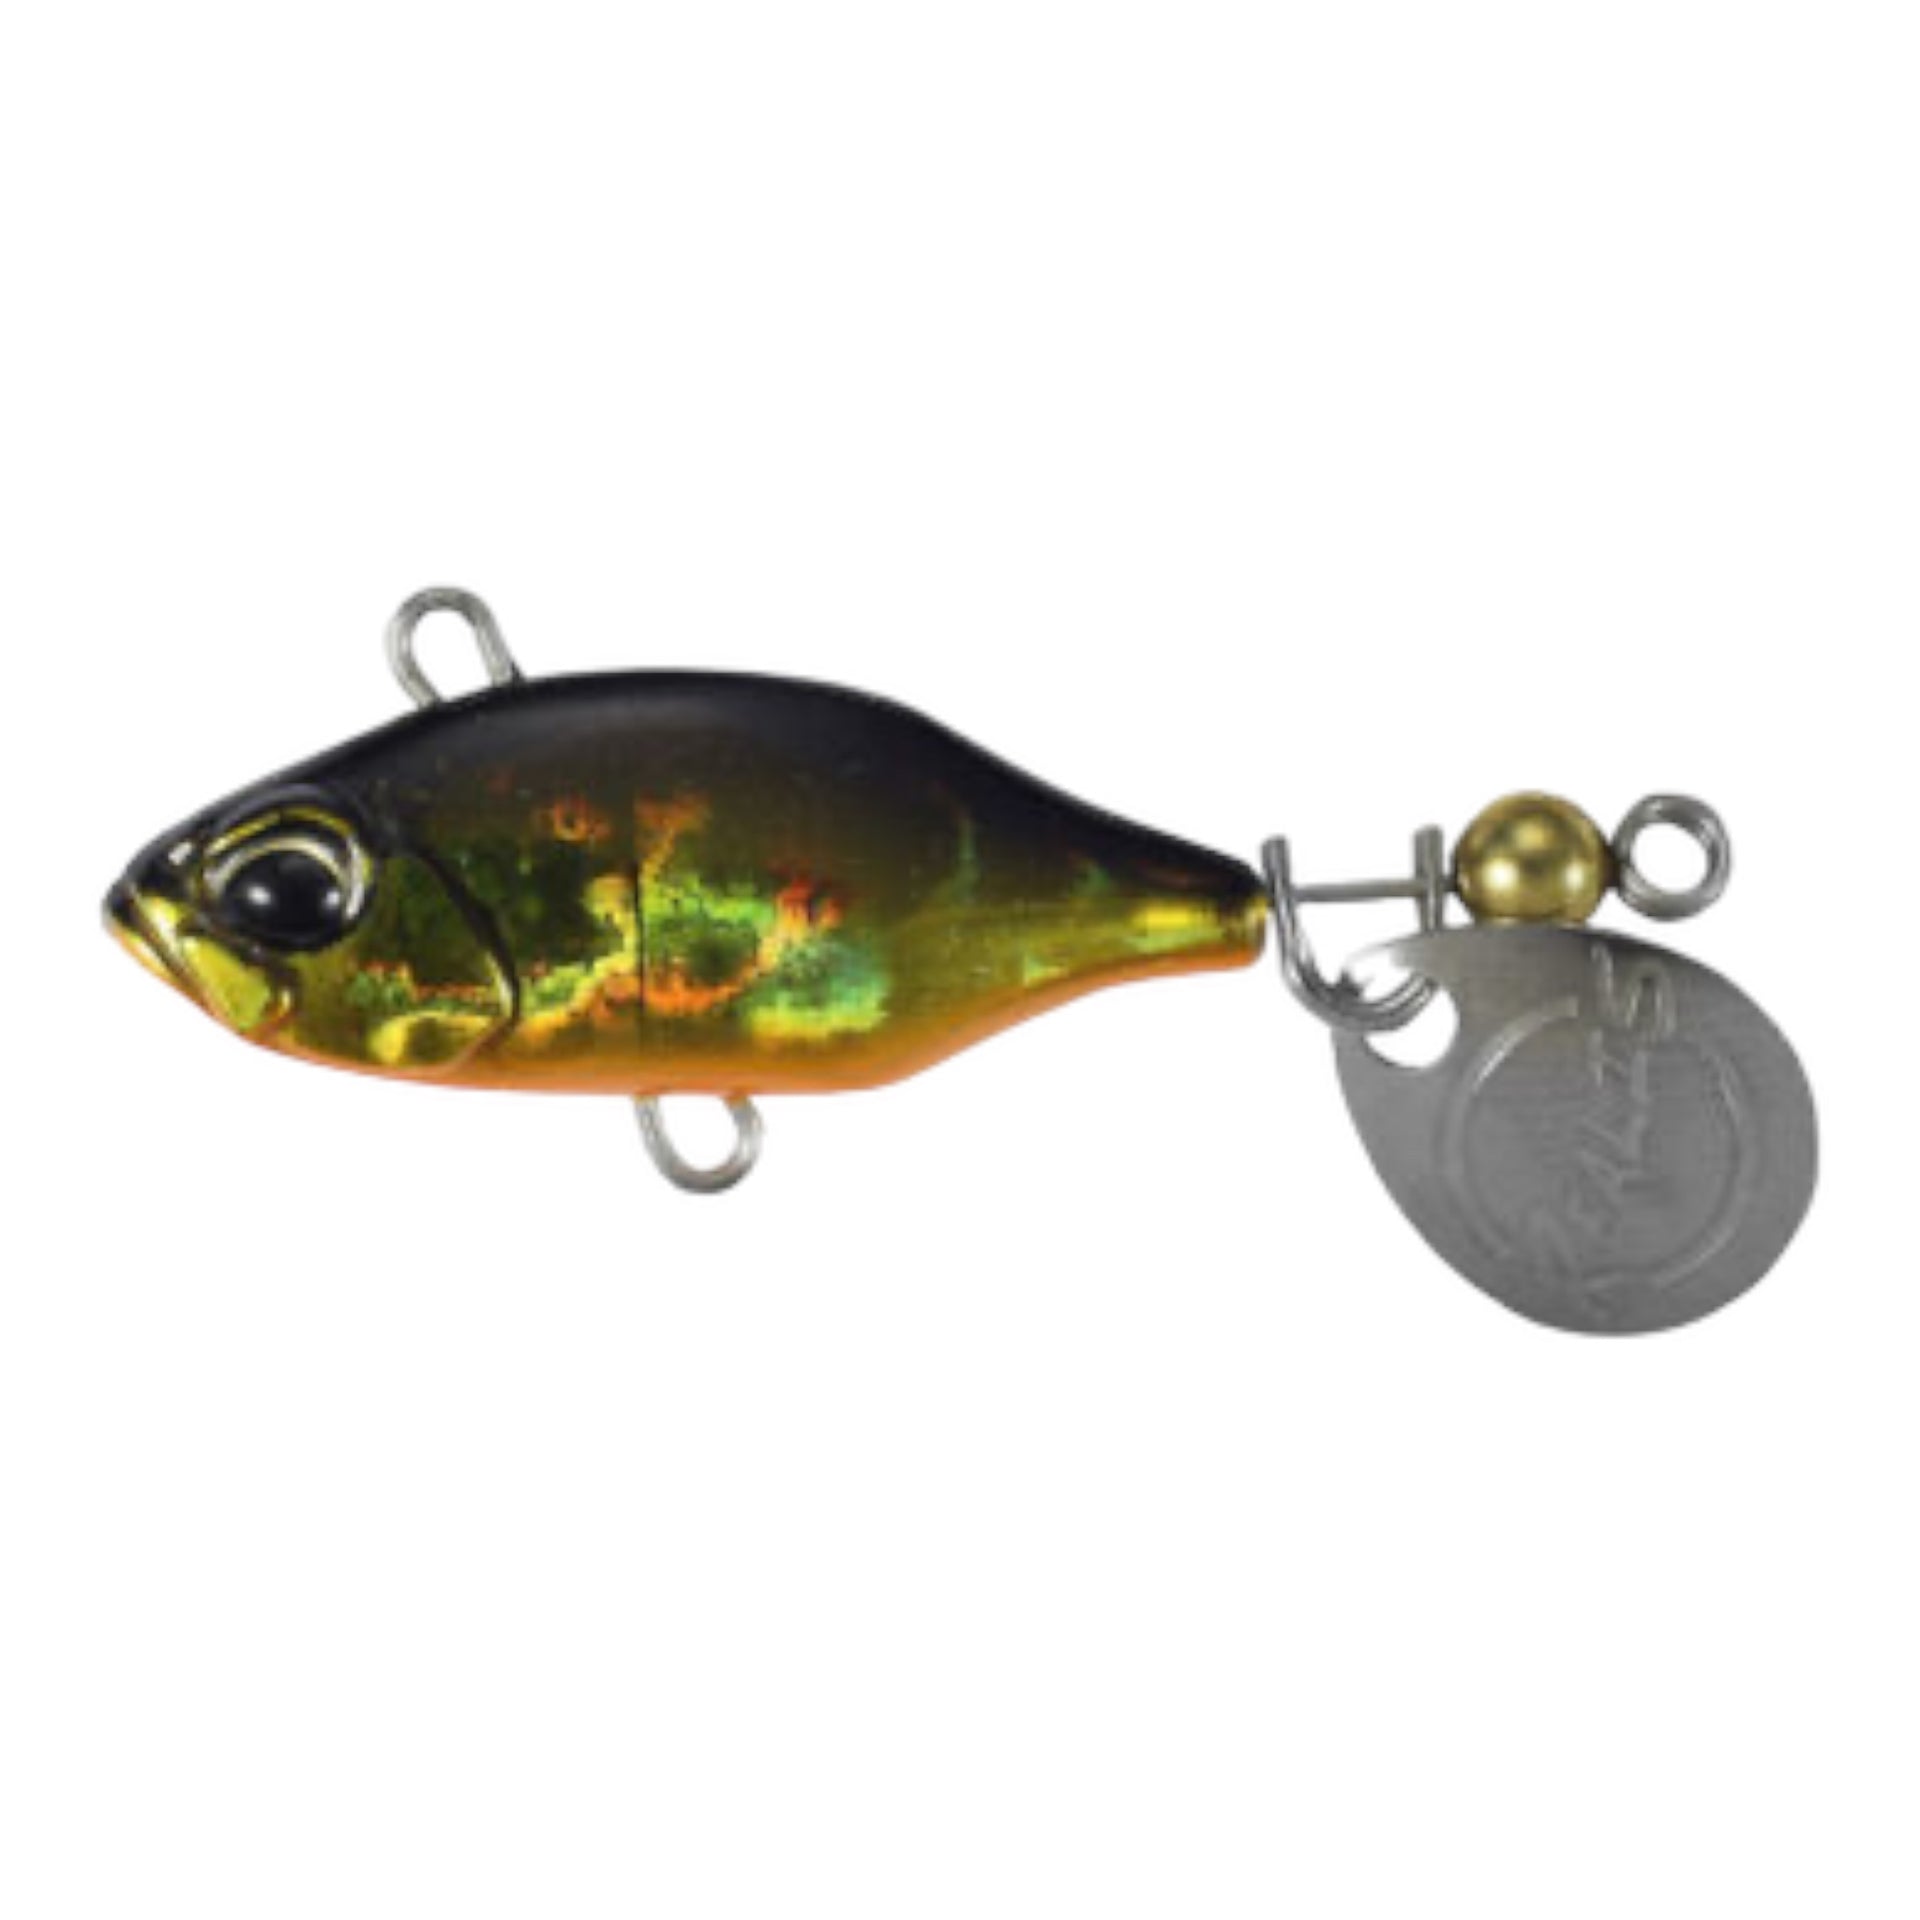 DUO Realis Spin Tail Spin Lure – Three Rivers Tackle